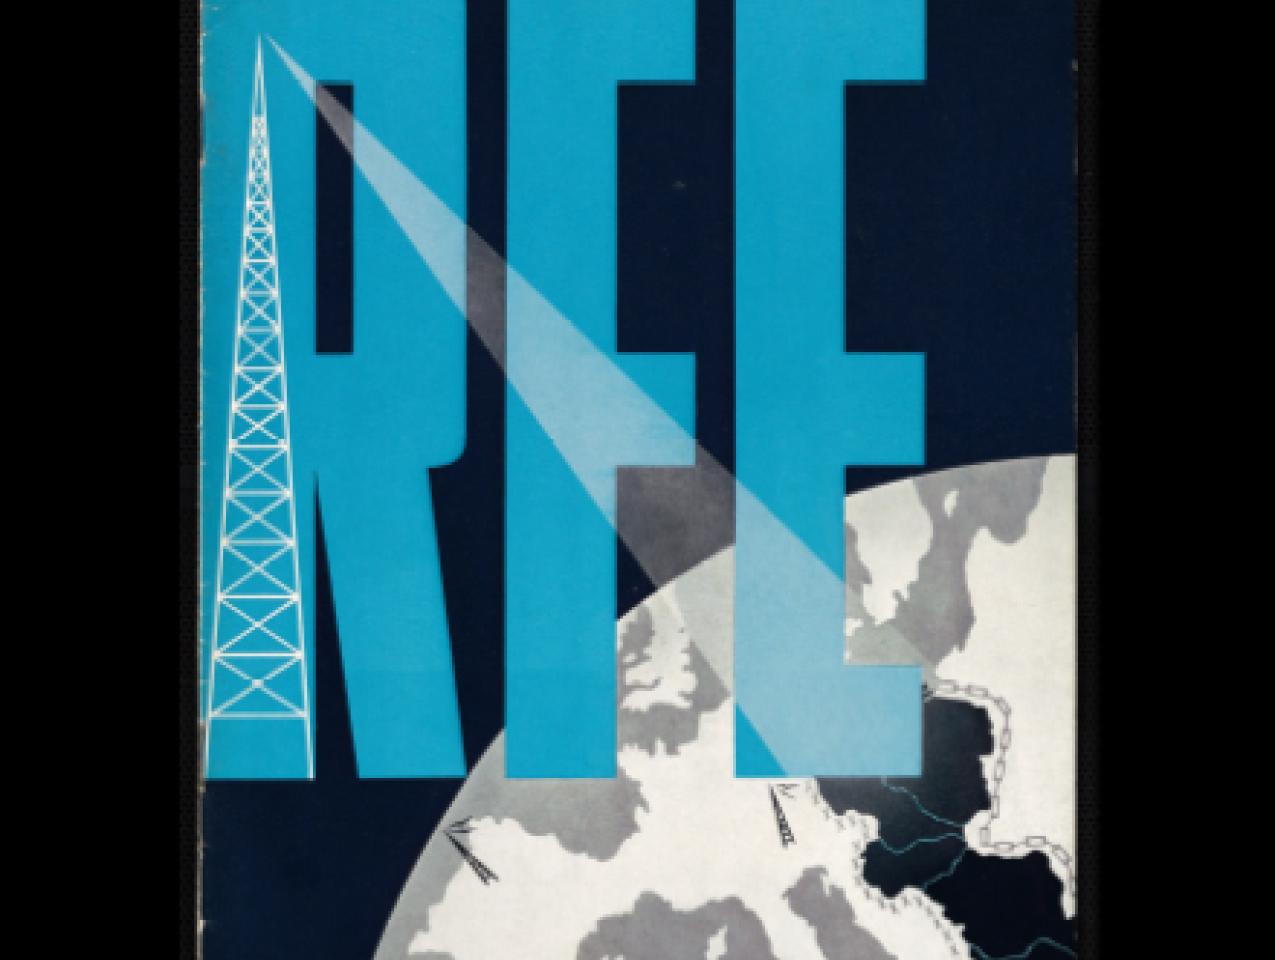 Cover of a booklet produced by Radion Free Europe and showing large RFE letters in blue with a white radio tower over the left side of the R, and broadcasting to eastern europe